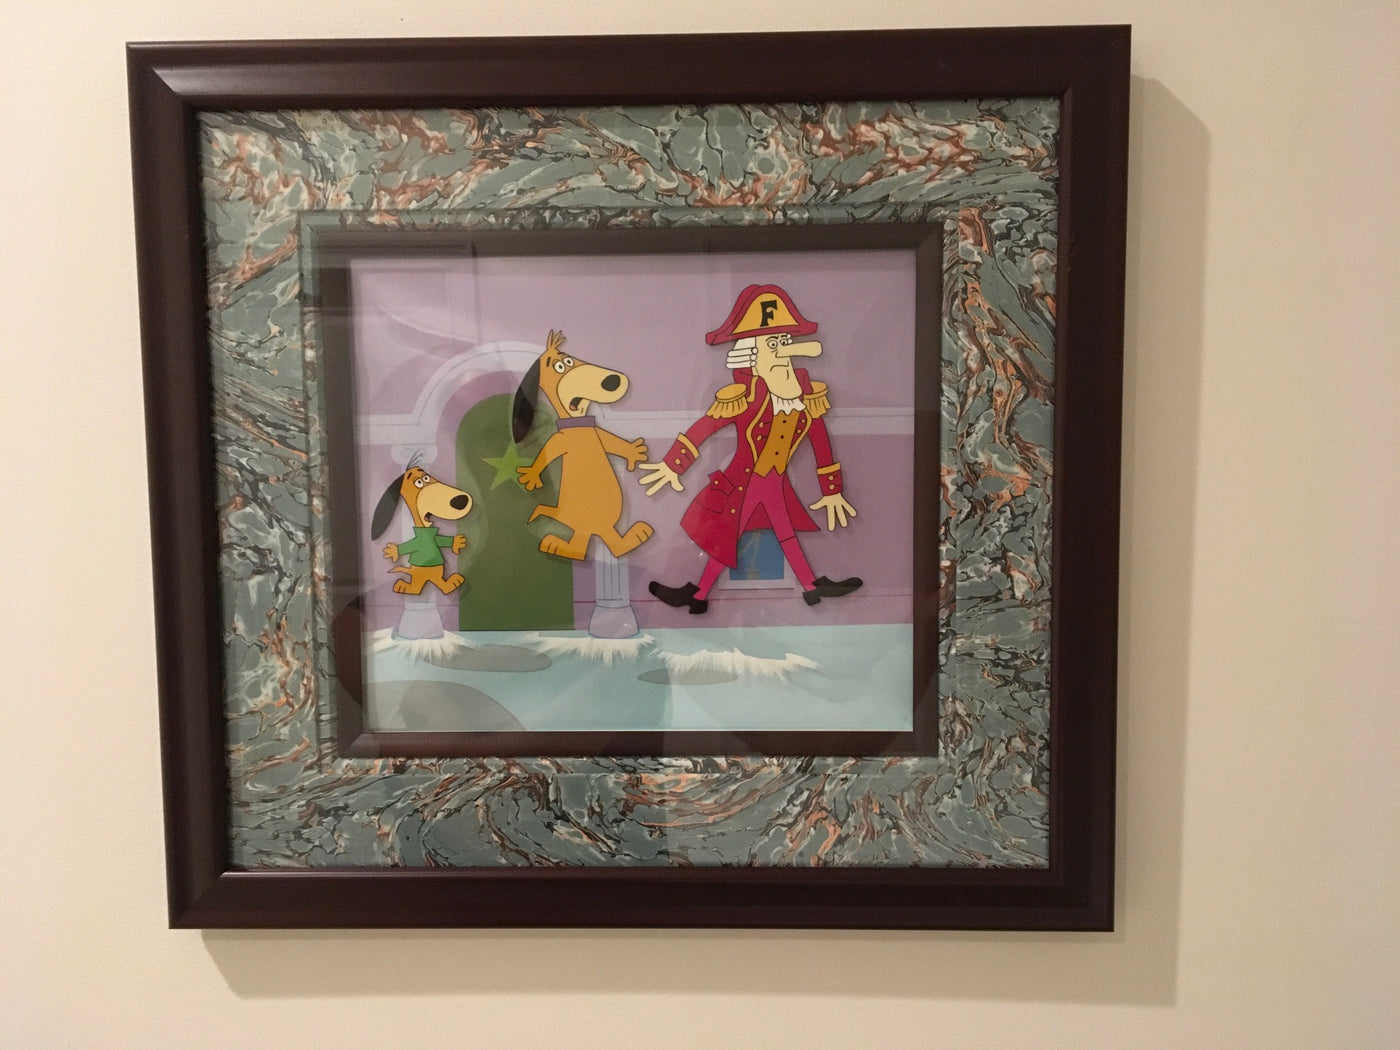 Hanna Barbera Augie Doggie and Doggie Daddy Production Cel